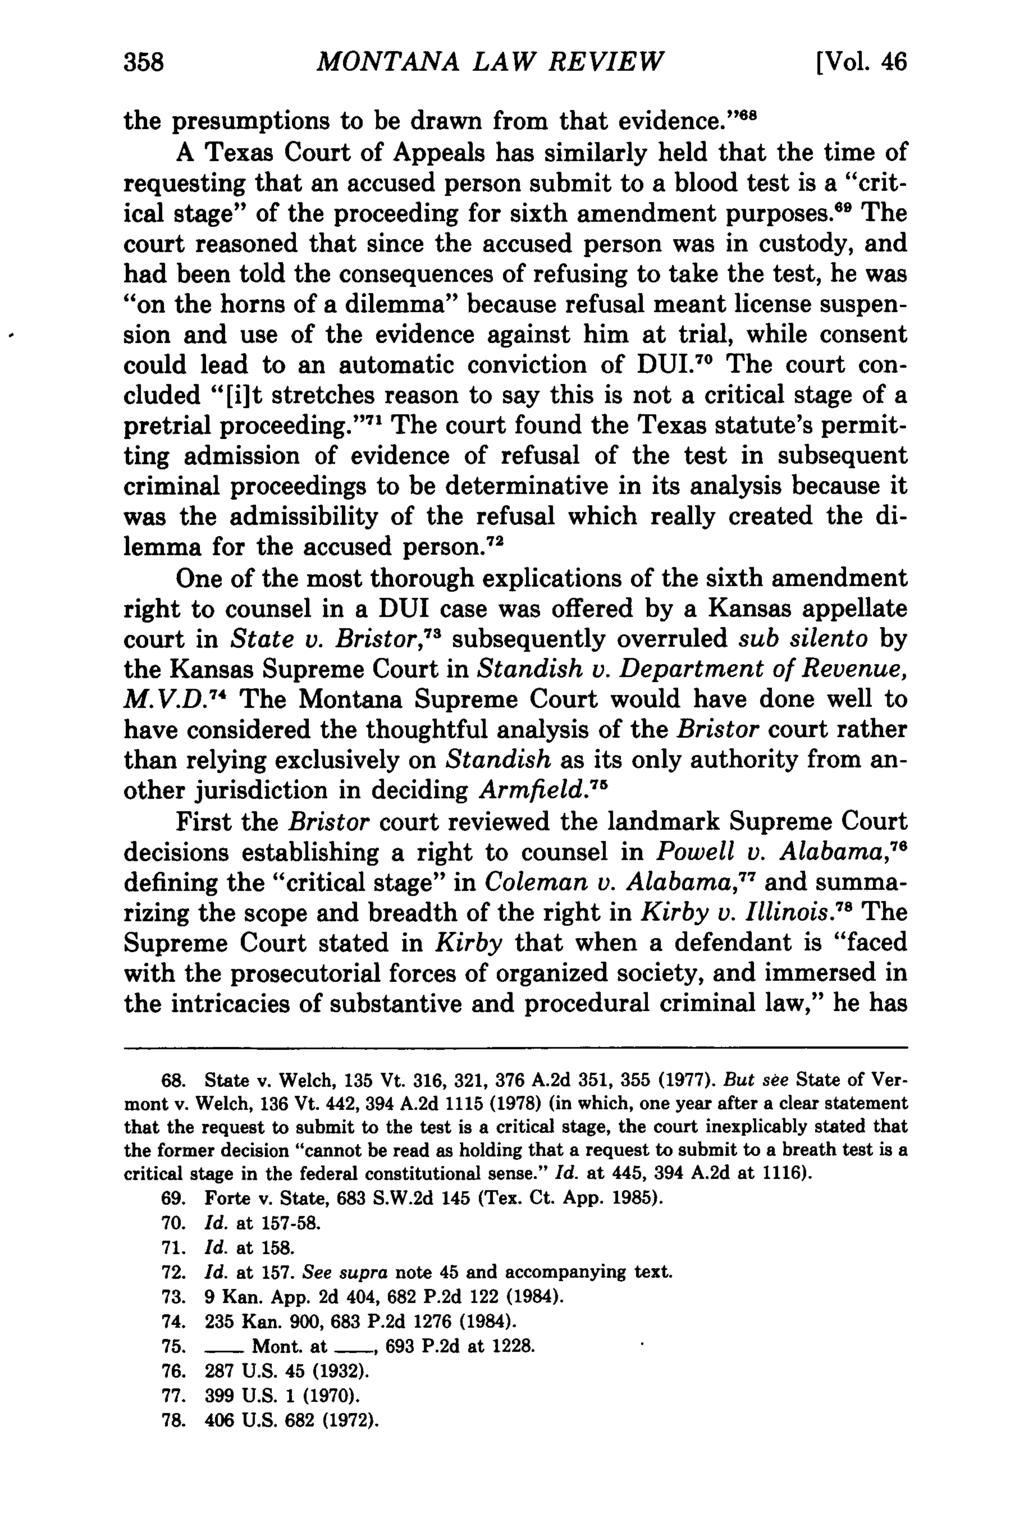 358 Montana MONTANA Law Review, LAW Vol. 46 [1985], REVIEW Iss. 2, Art. 8 [Vol. 46 the presumptions to be drawn from that evidence.